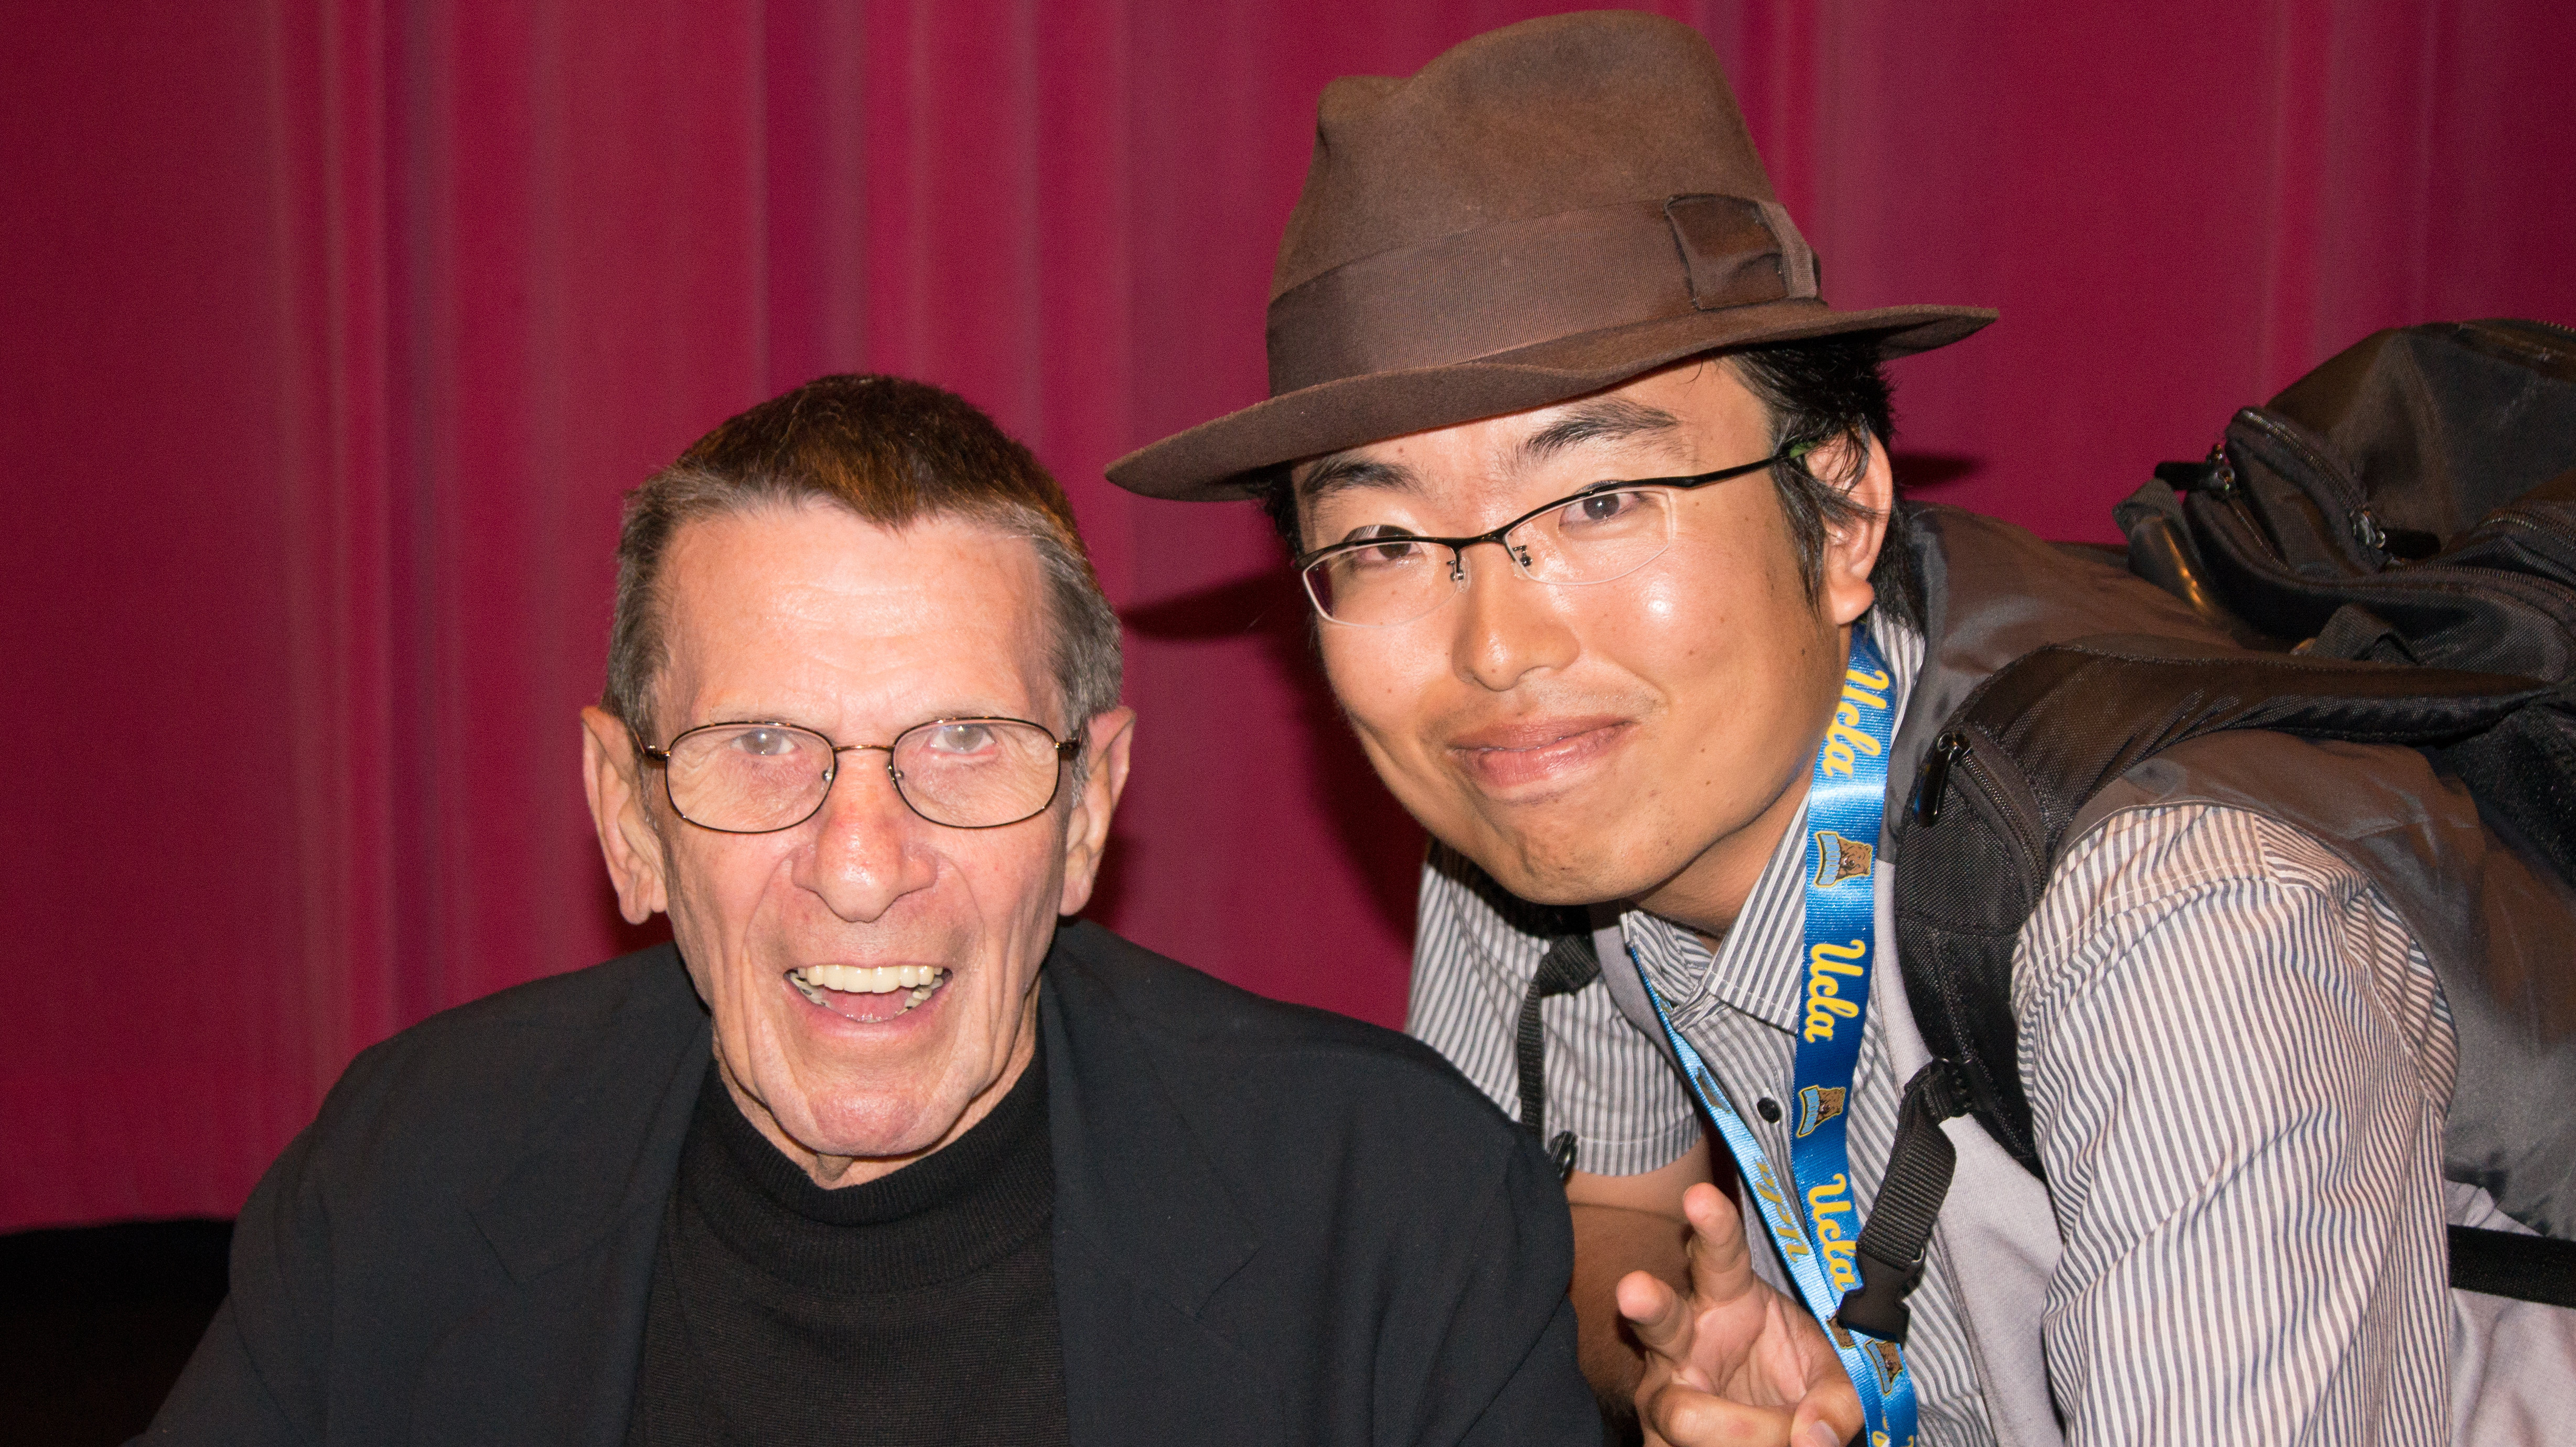 ''Mr. Spock'' Leonard Nimoy who mostly known for the Hollywood classical Blockbuster Sci-Fi movie, Star Trek (1966) and the Roger Corman Award Winning filmmaker Ryota Nakanishi at UCLA.